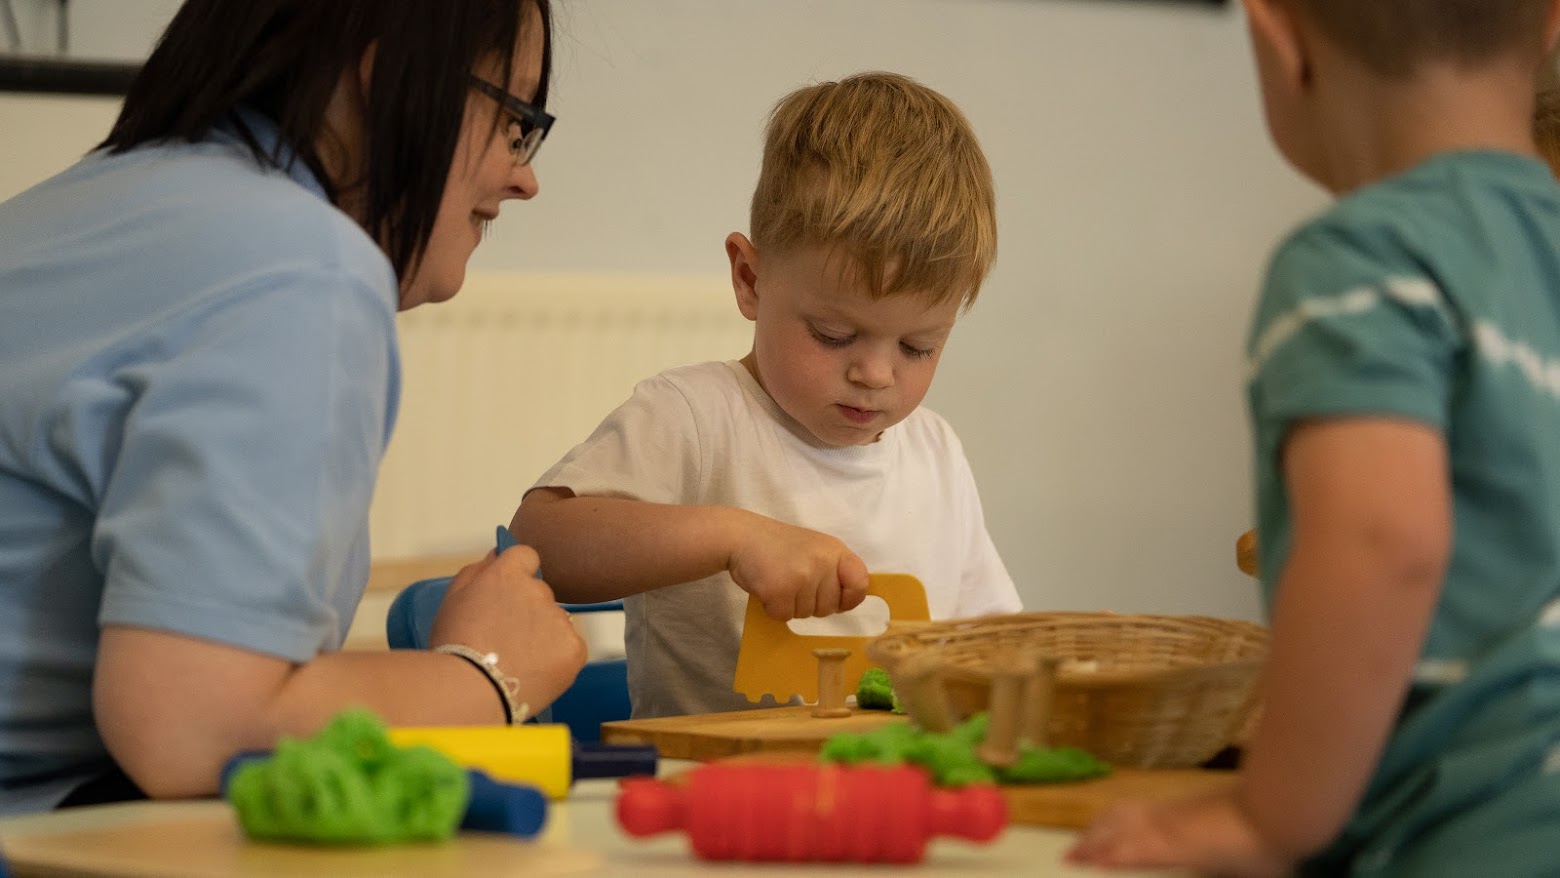 A preschool pupil is pictured playng with toys with a teacher sat next to him supervising.